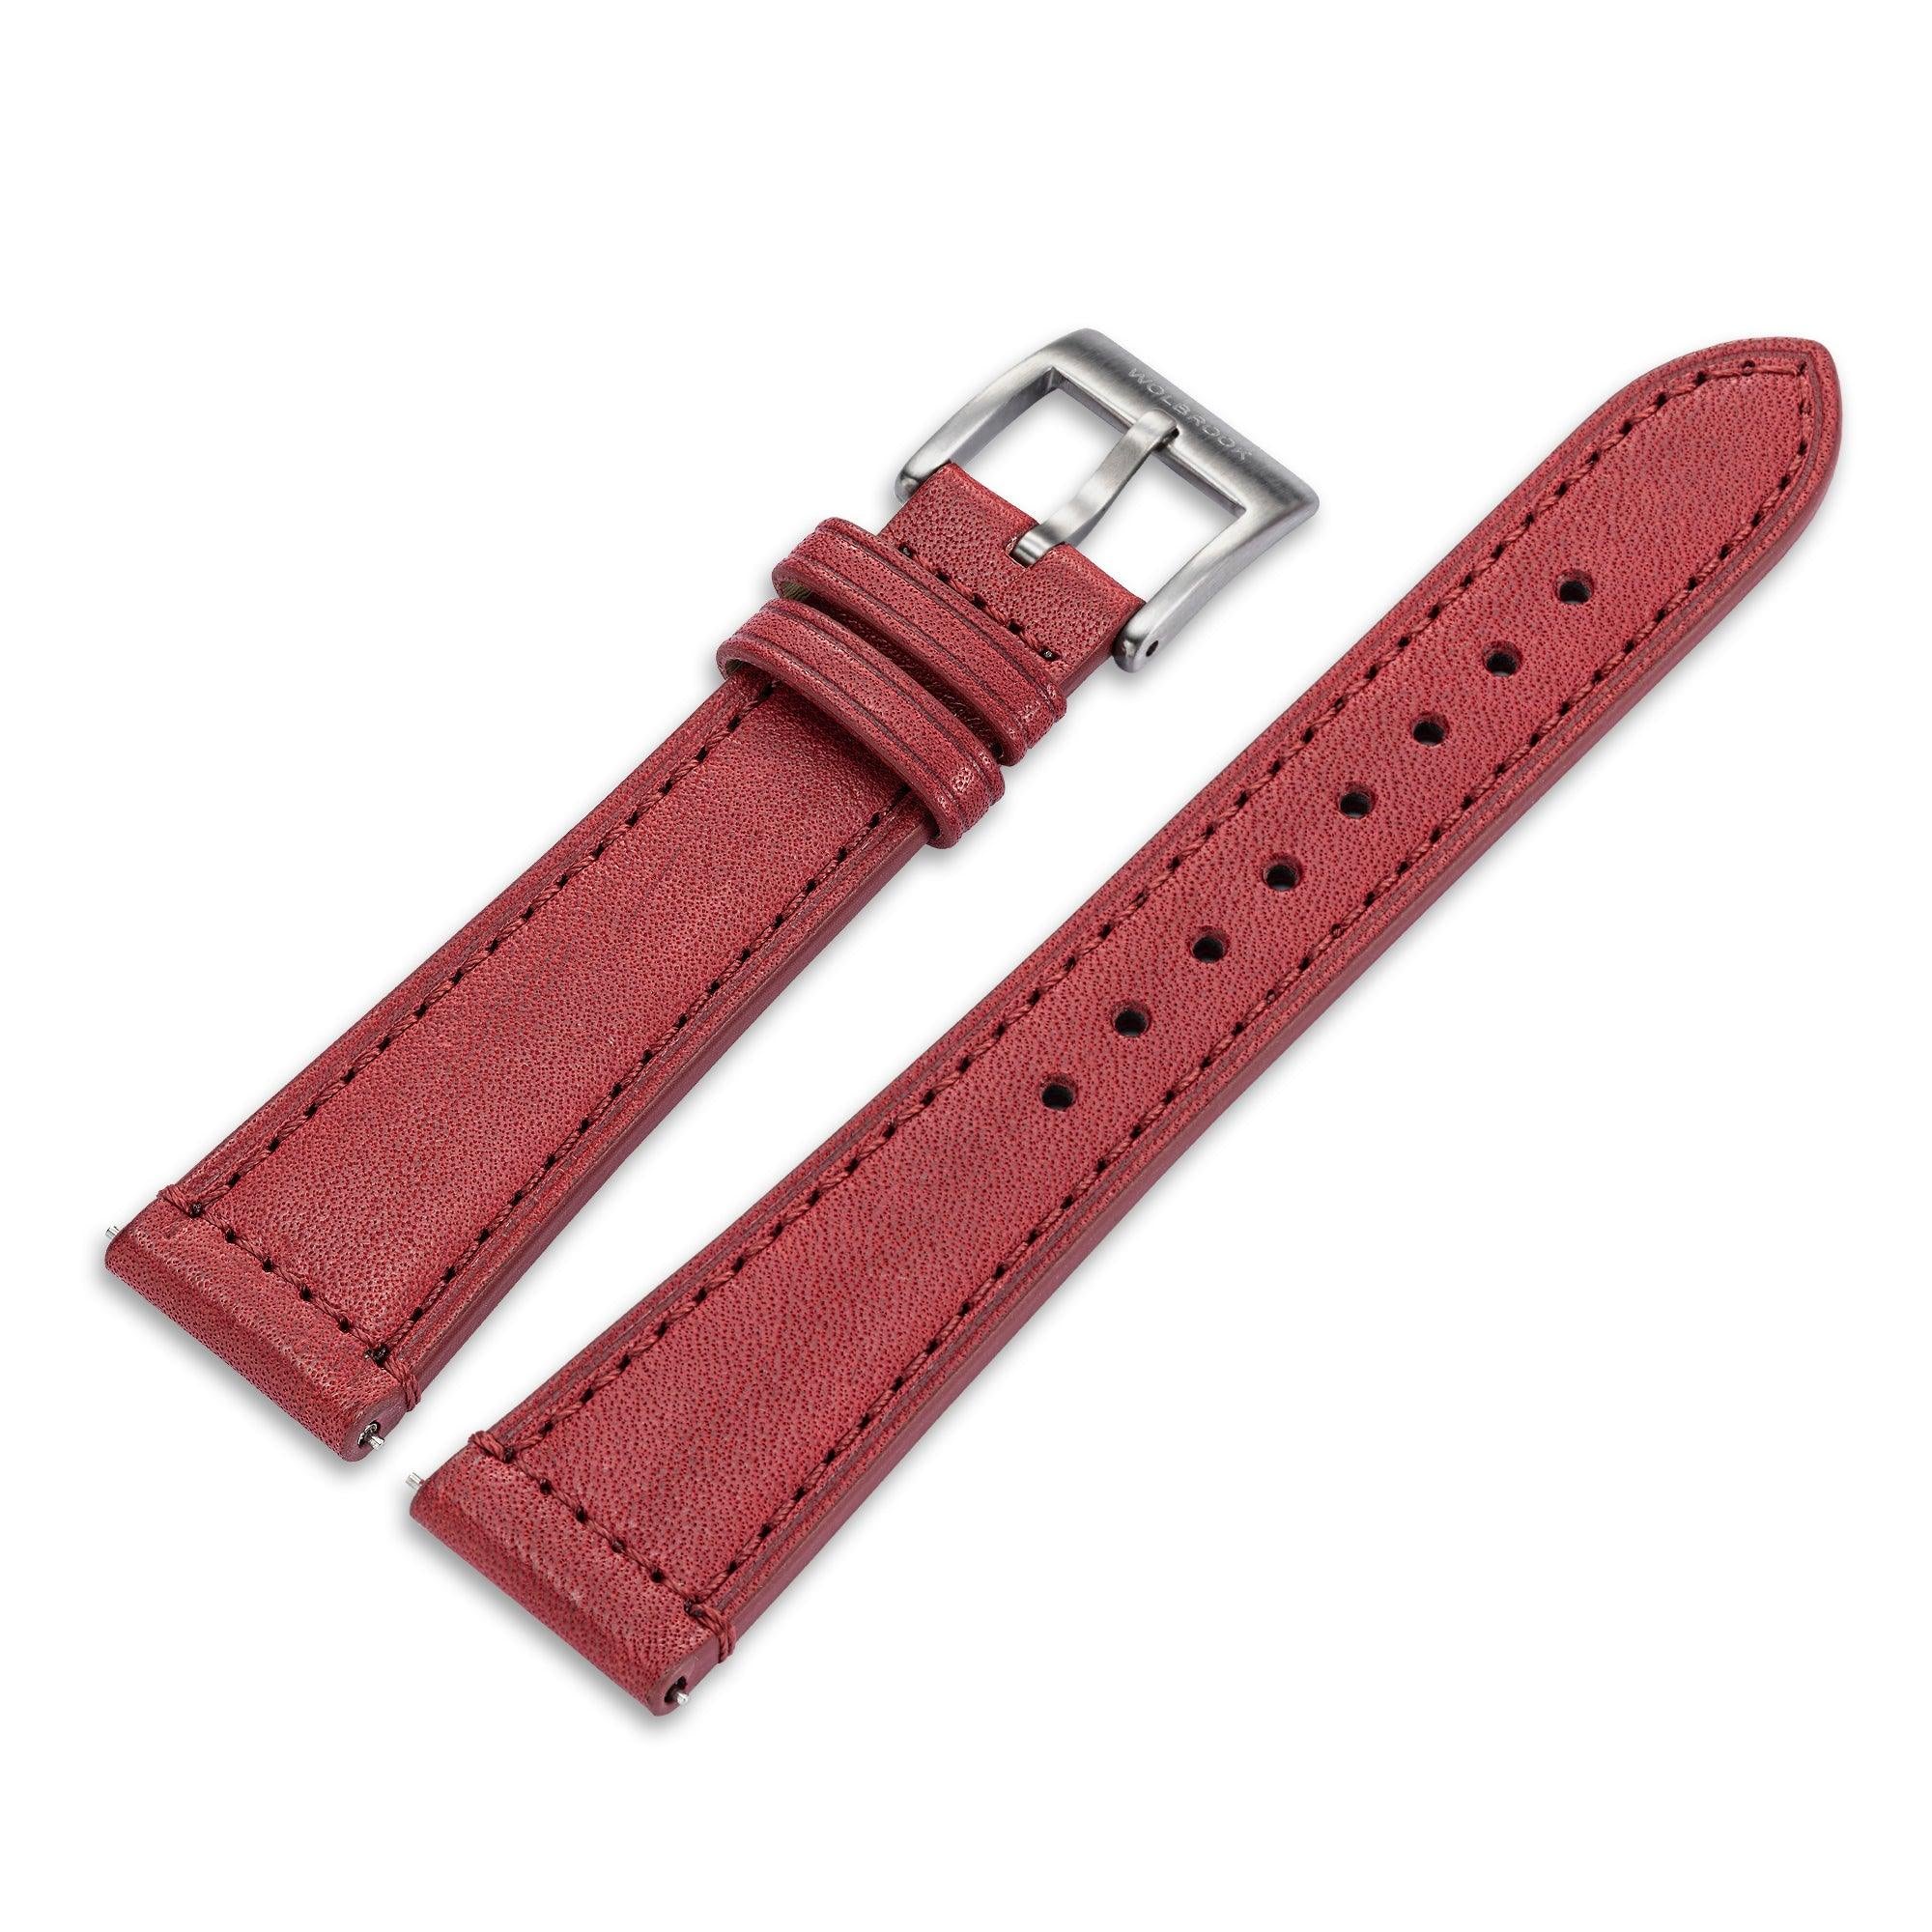 Two-Piece Red Leather Strap & Steel Buckle for Field Watch